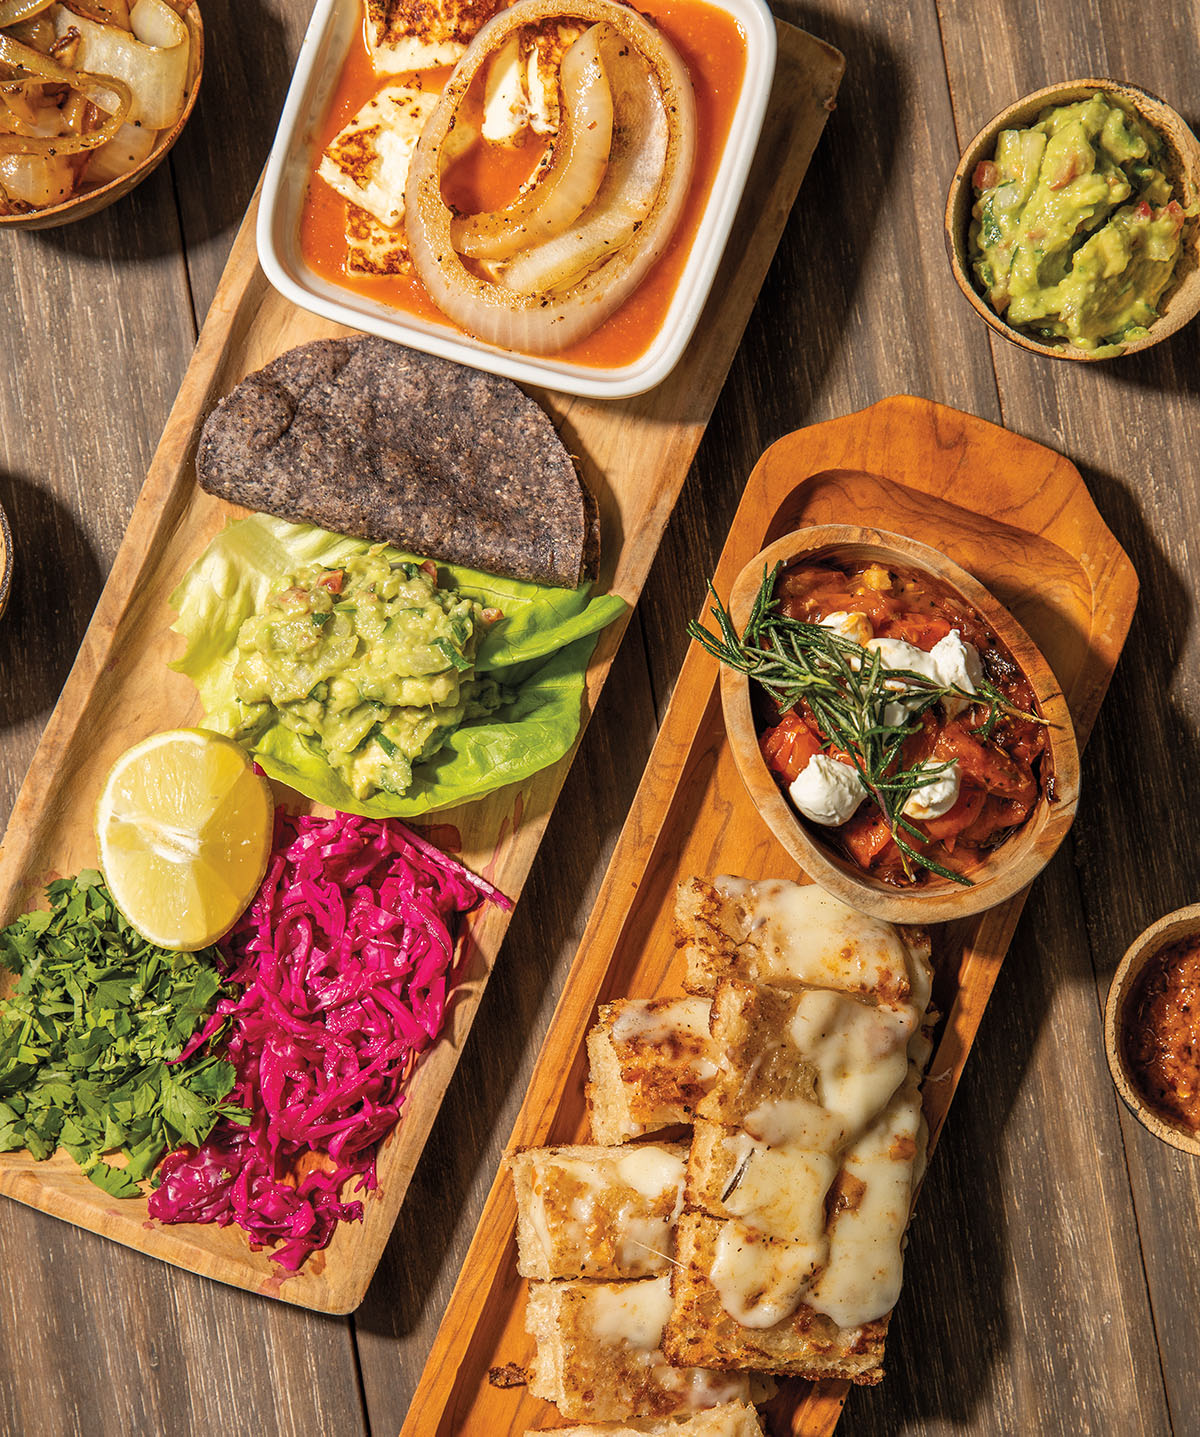 An overhead view of brightly colored dishes on wooden trays